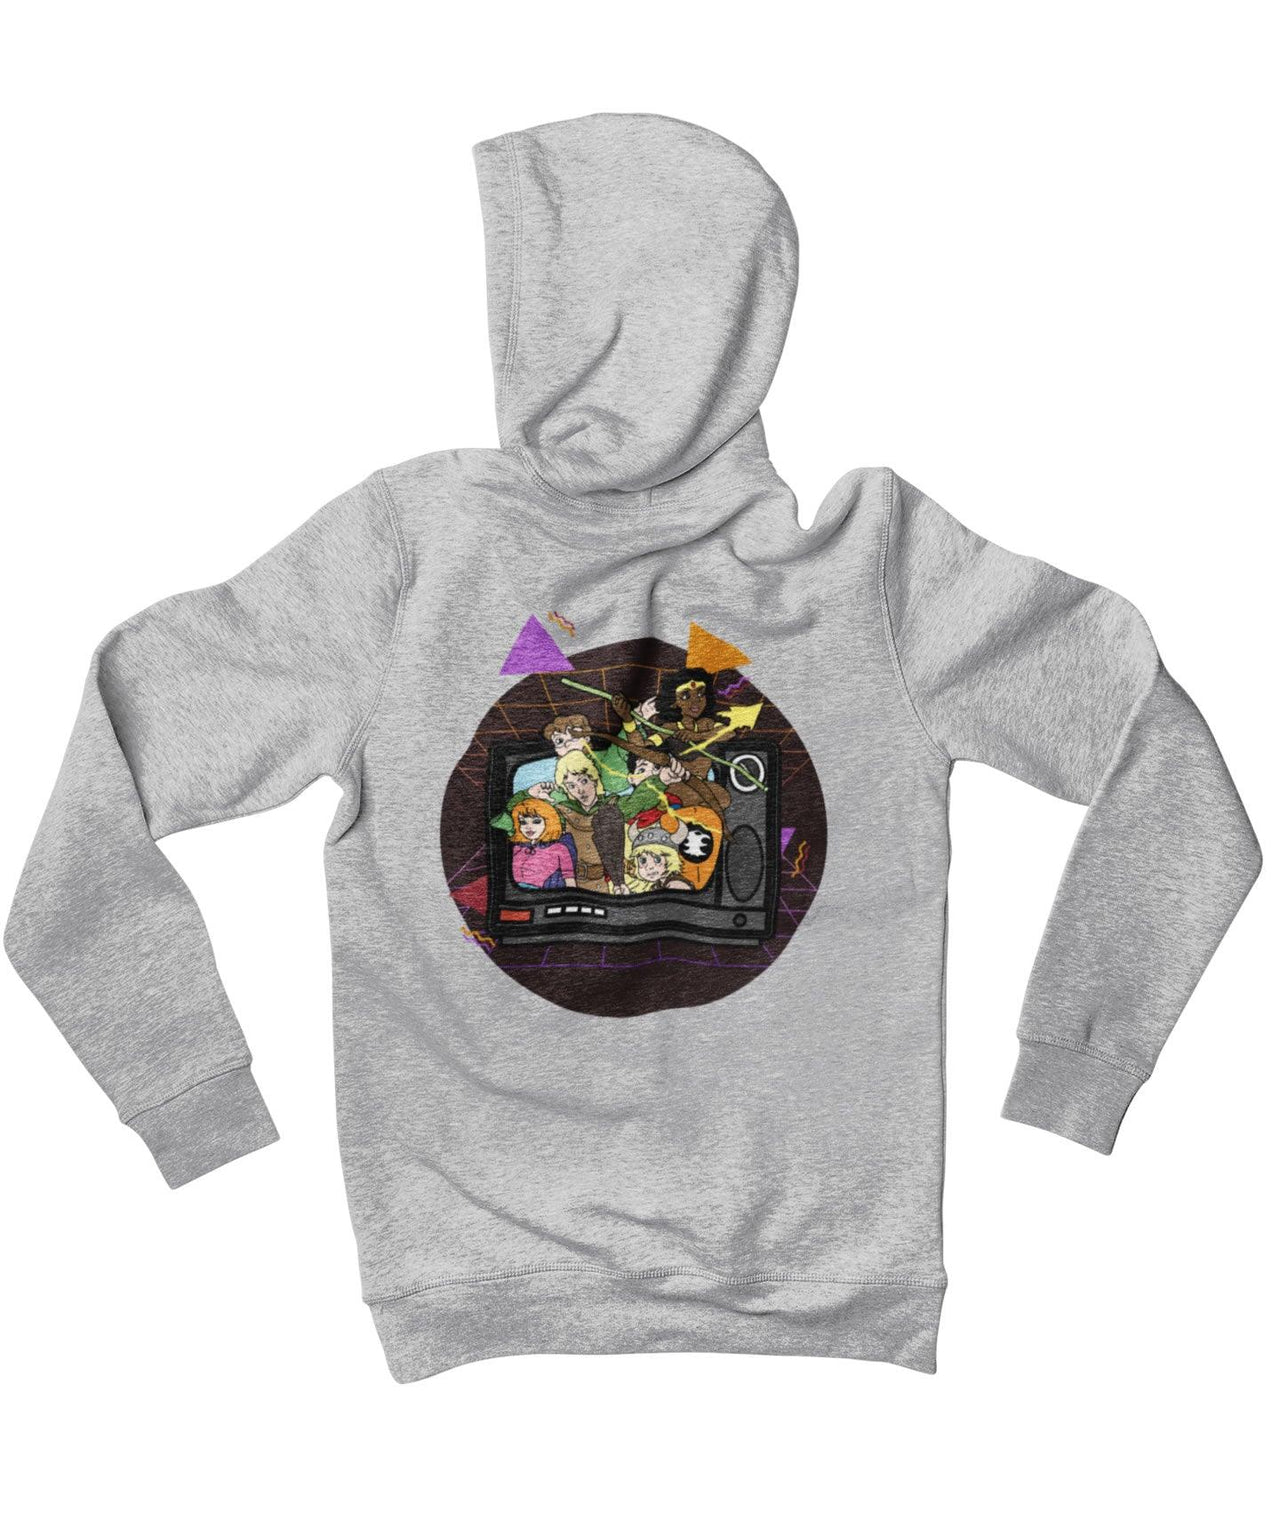 Top Notchy TV Toon Number 6 Back Printed Hoodie For Men and Women 8Ball